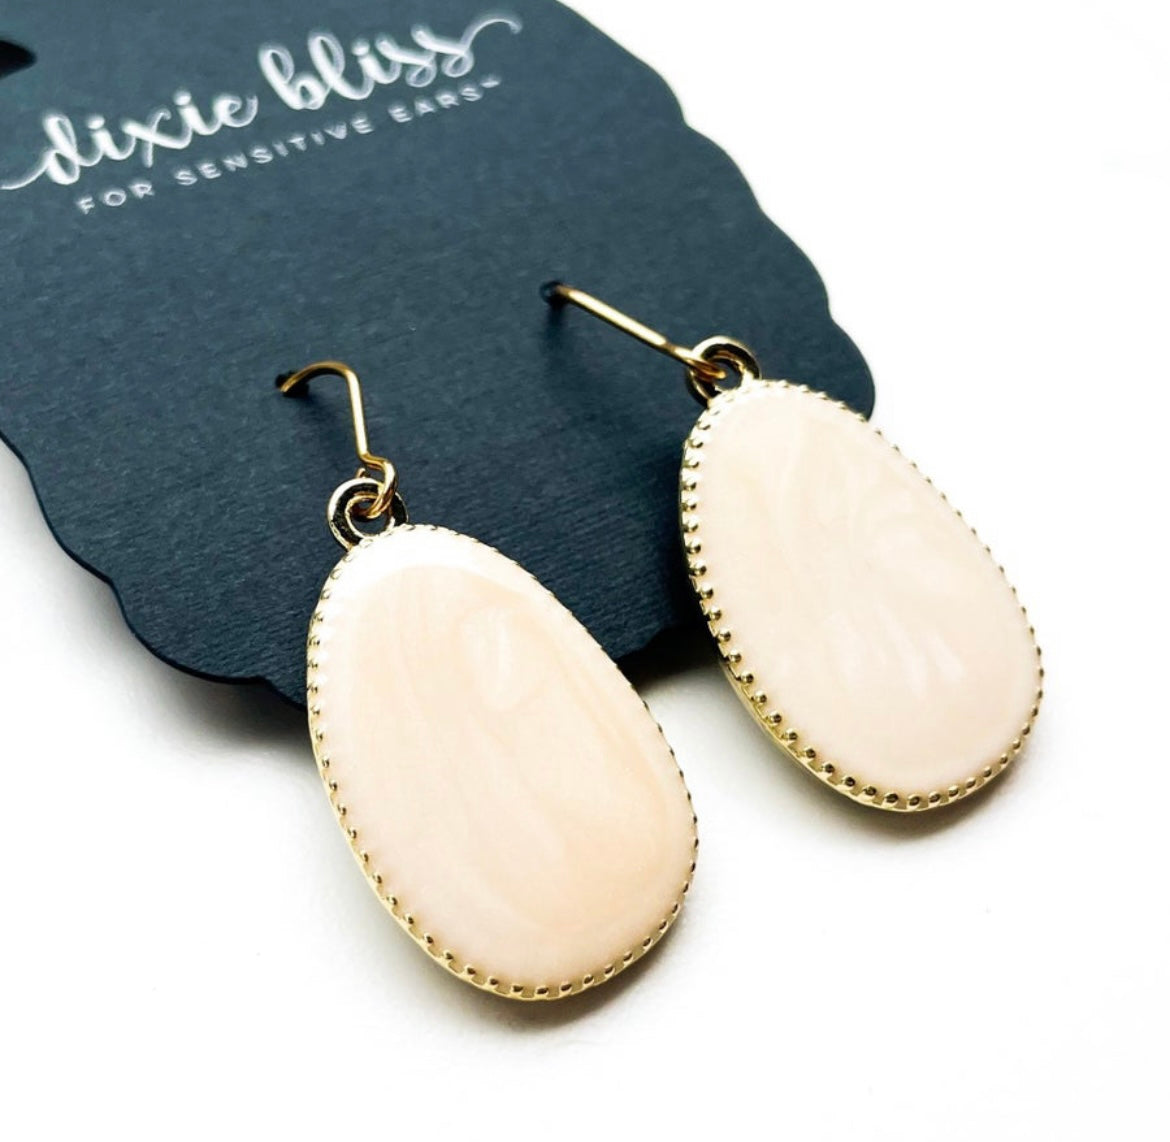 Keep It Simple in French Macaron - Dixie Bliss - Dangle Earring